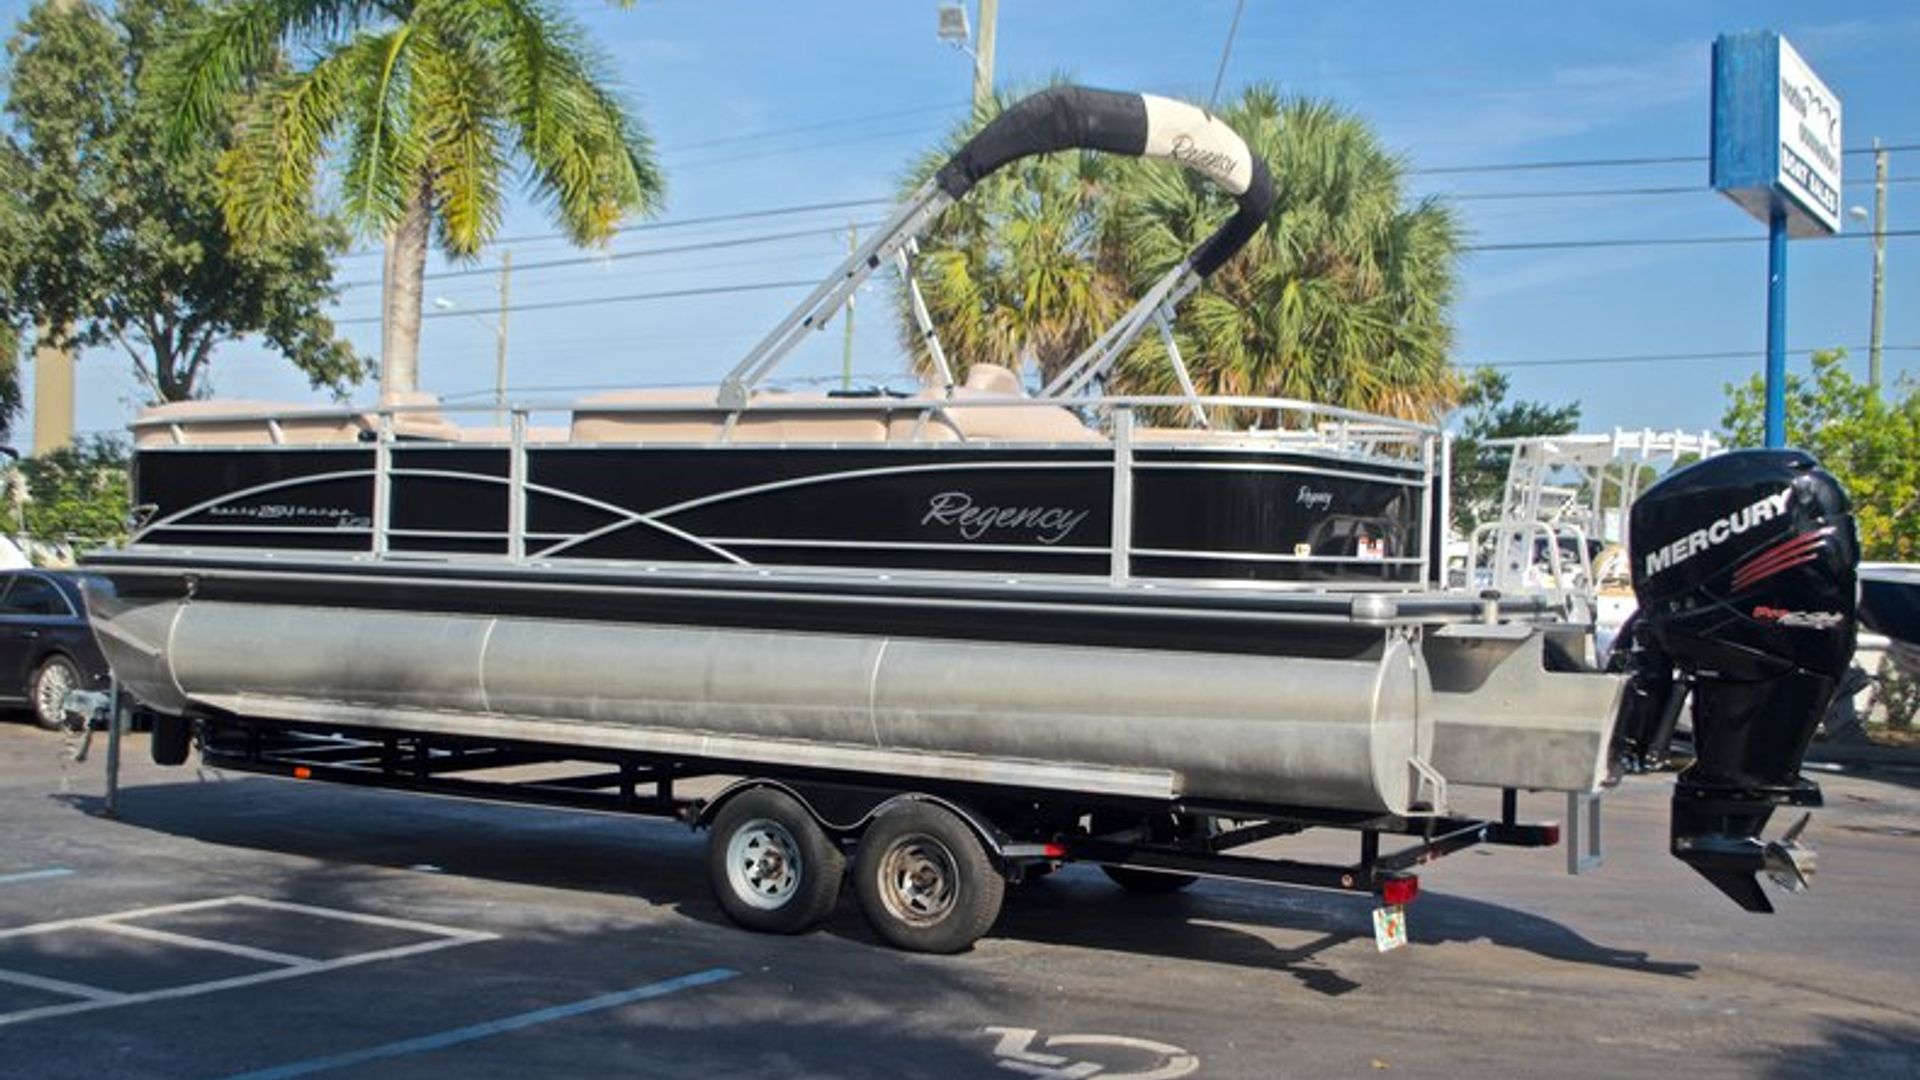 Used 2014 Regency Party Barge 254 XP3 #8806 image 7